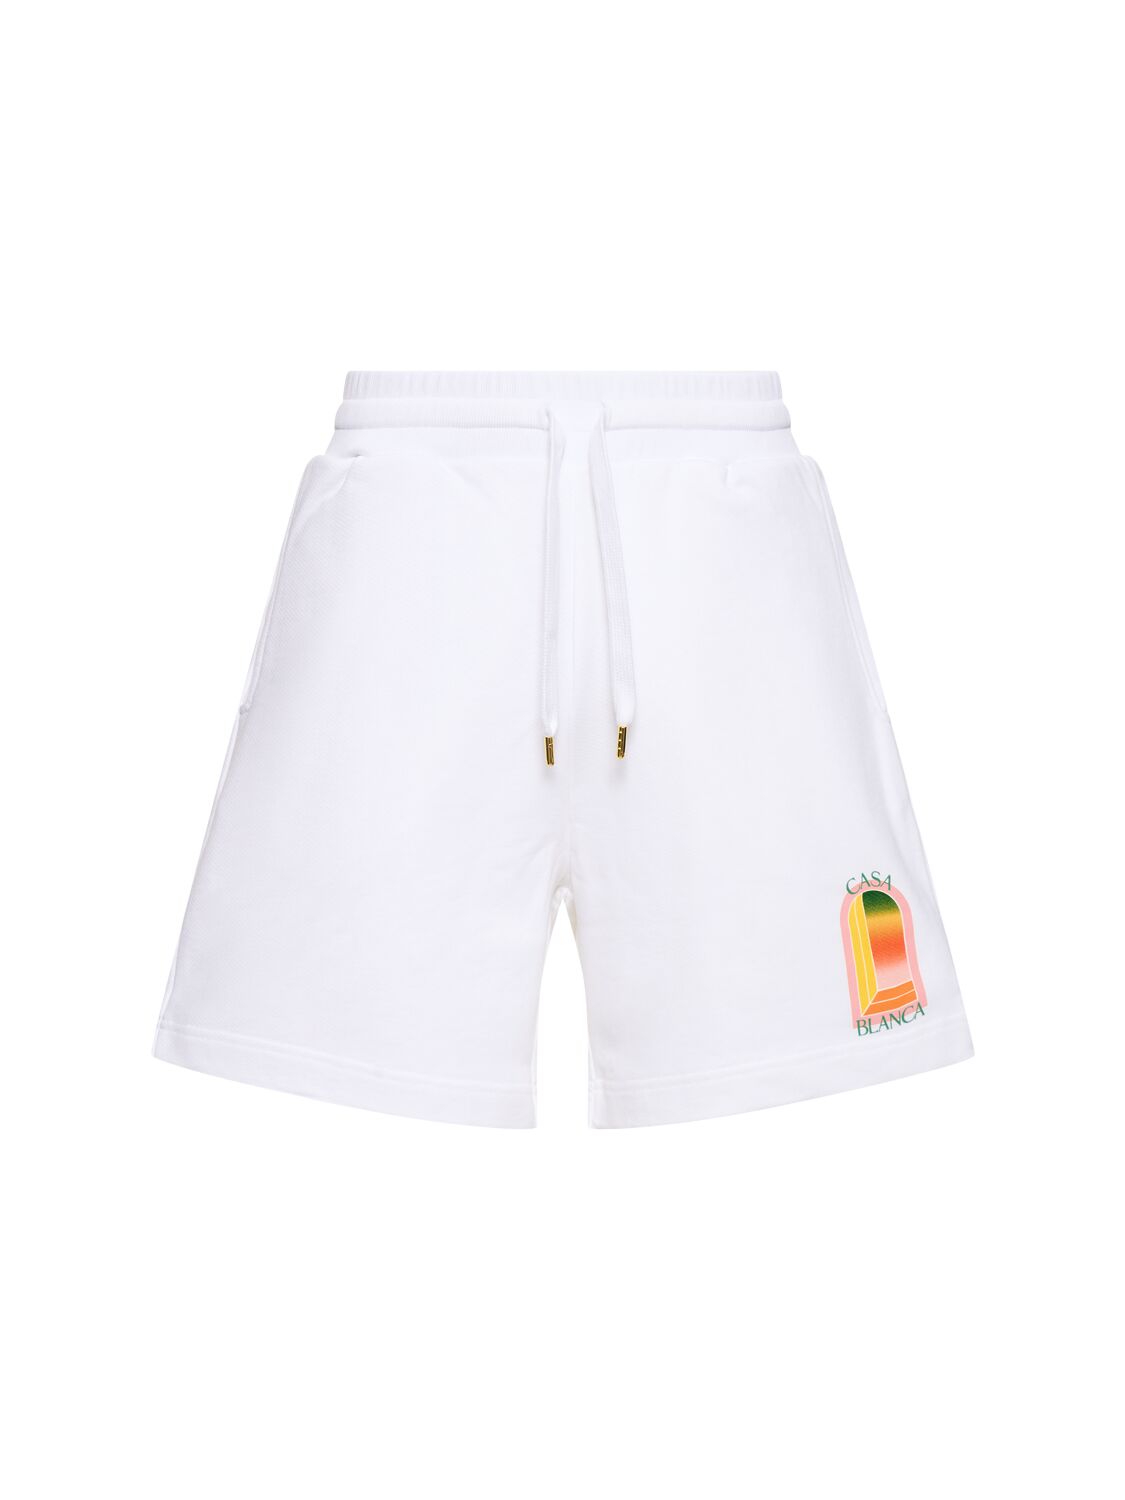 Image of Gradient Arch Organic Cotton Shorts